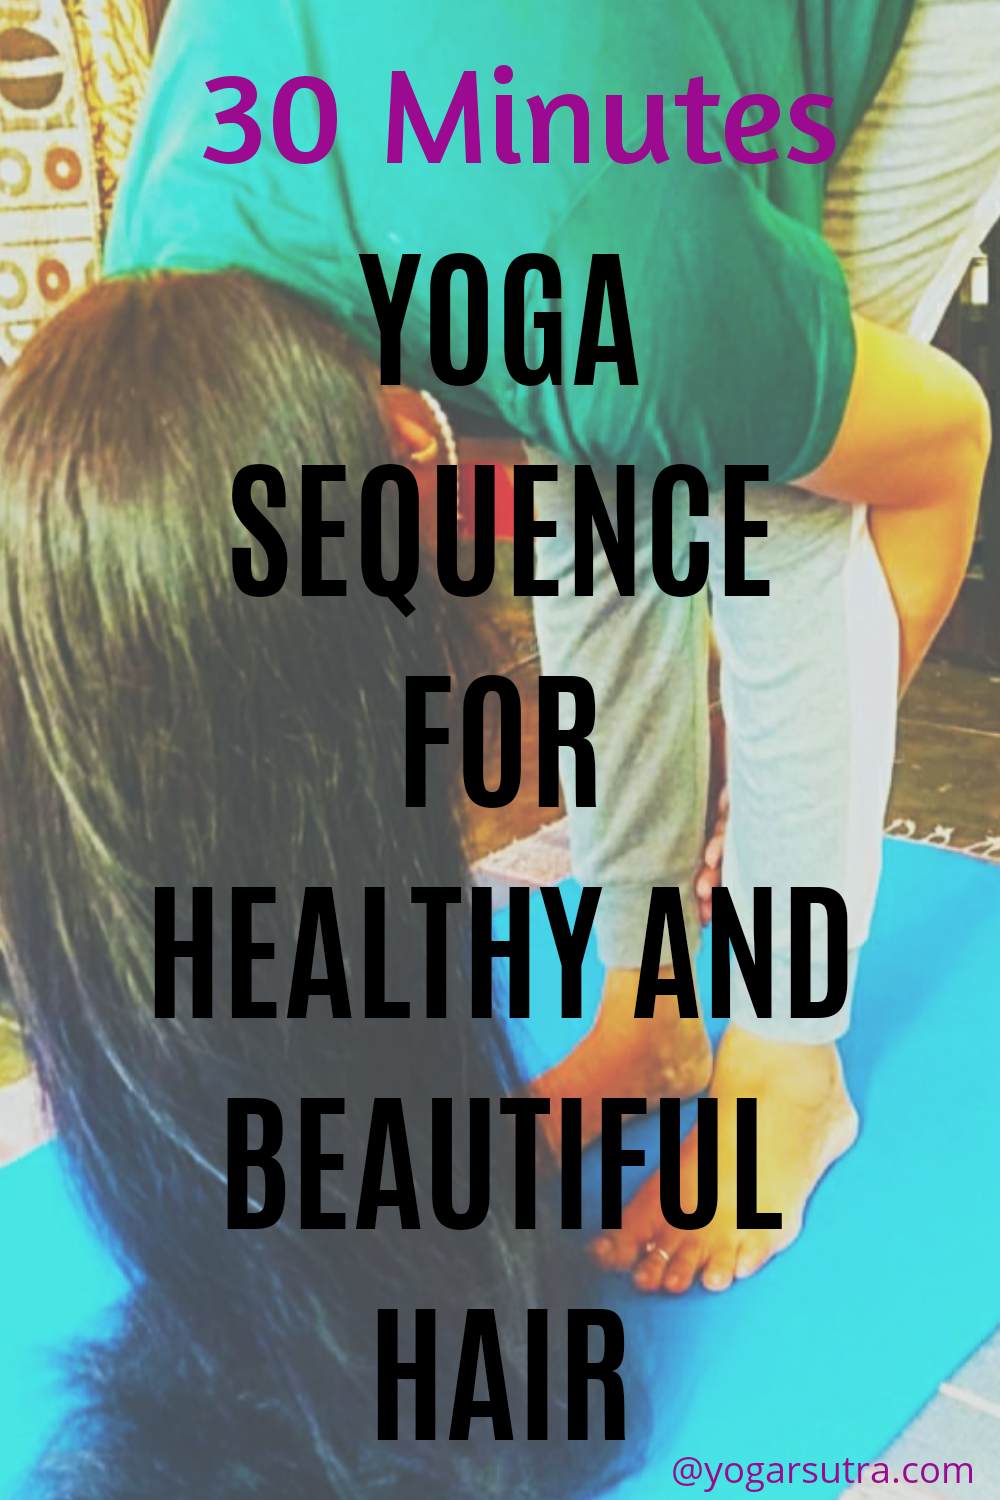 Yoga For Beautiful and Healthy Hair| Grow Your Confidence - yogarsutra